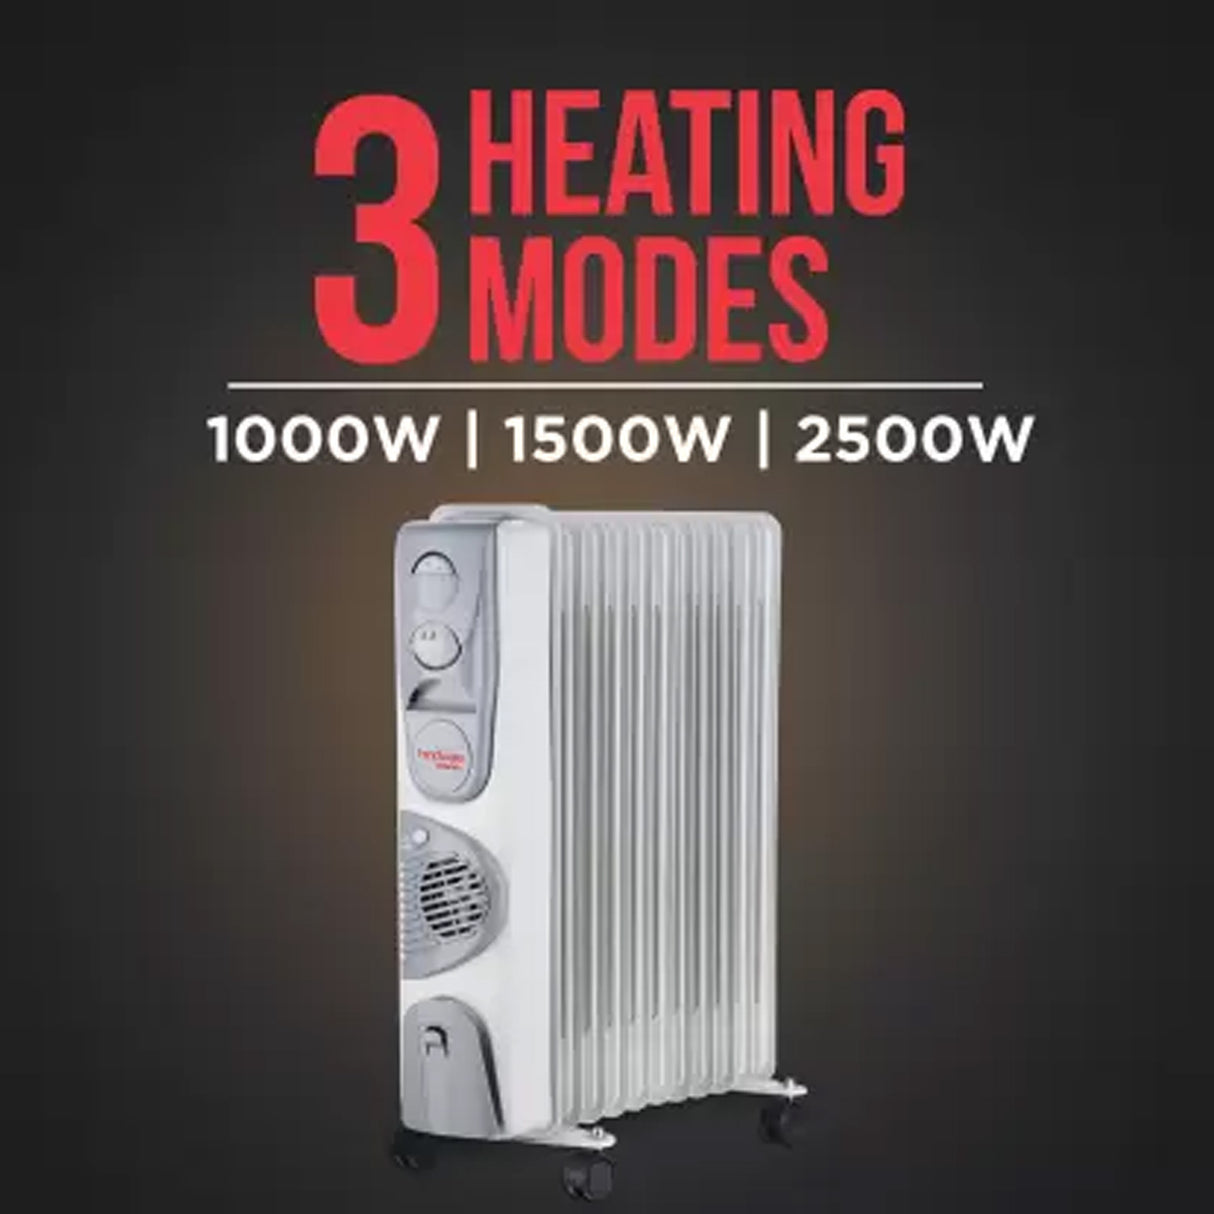 Hindware Salome: Versatile Electric Oil Filled Room Heater for Effective Heating